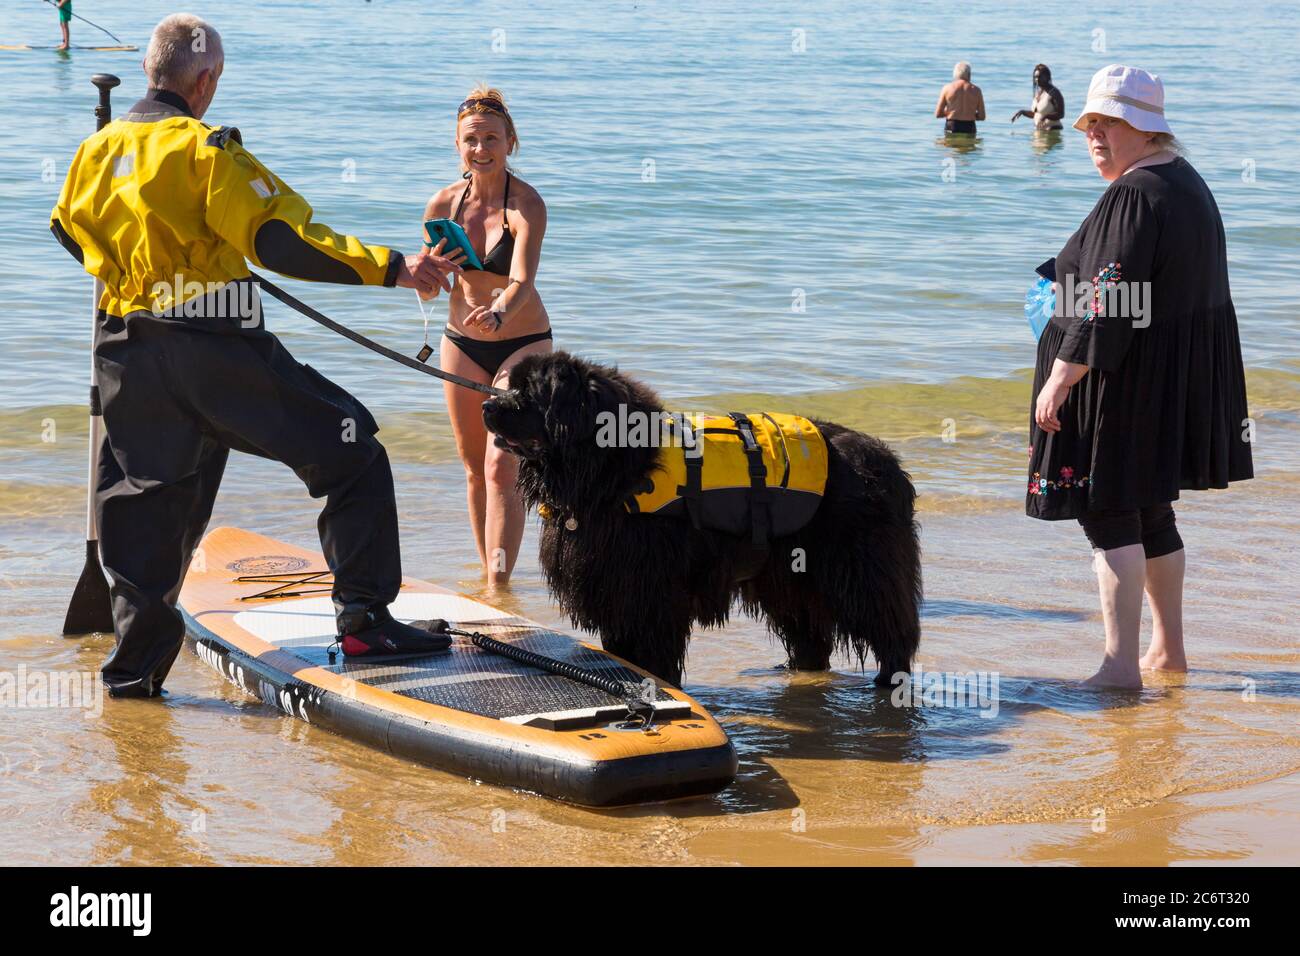 Poole, Dorset UK. 12th July 2020. UK weather: very warm sunny day at Poole beaches as dog owners take their dogs for some dog training lessons, including learning to paddle board and increase their confidence in the sea whilst enjoying the sunshine. Newfoundland dog learning to paddleboard. Credit: Carolyn Jenkins/Alamy Live News Stock Photo